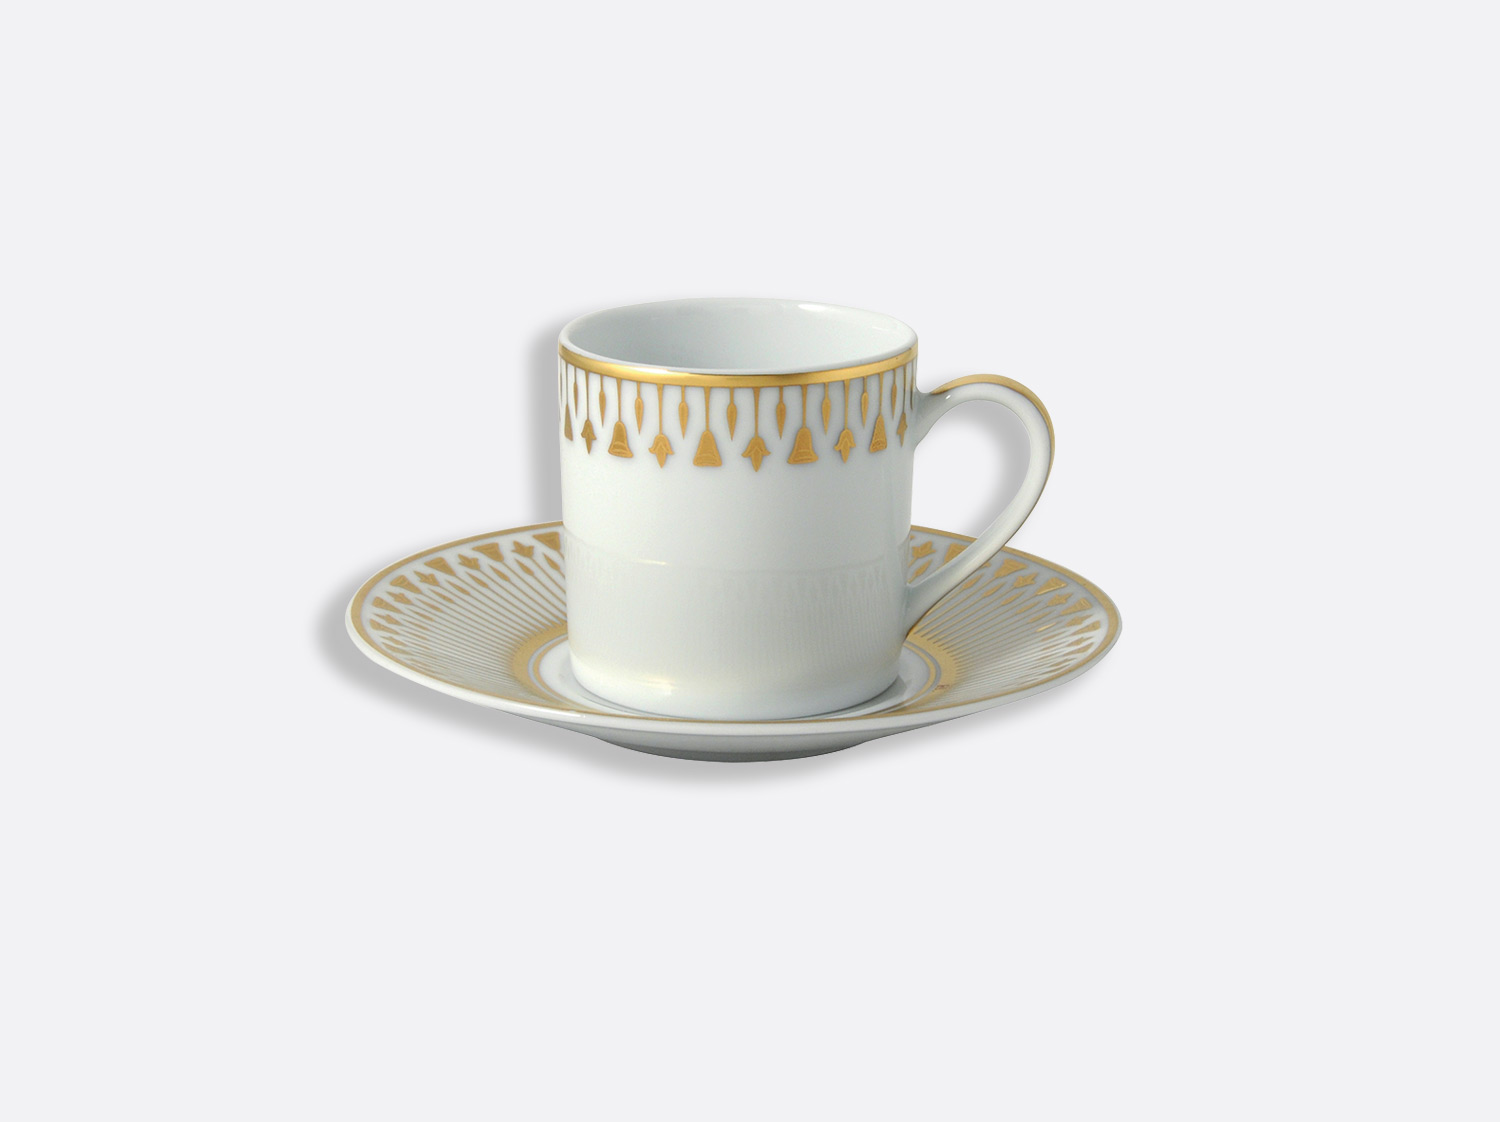 China Espresso cup and saucer gift box - 3 oz - Per unit of the collection Soleil levant | Bernardaud